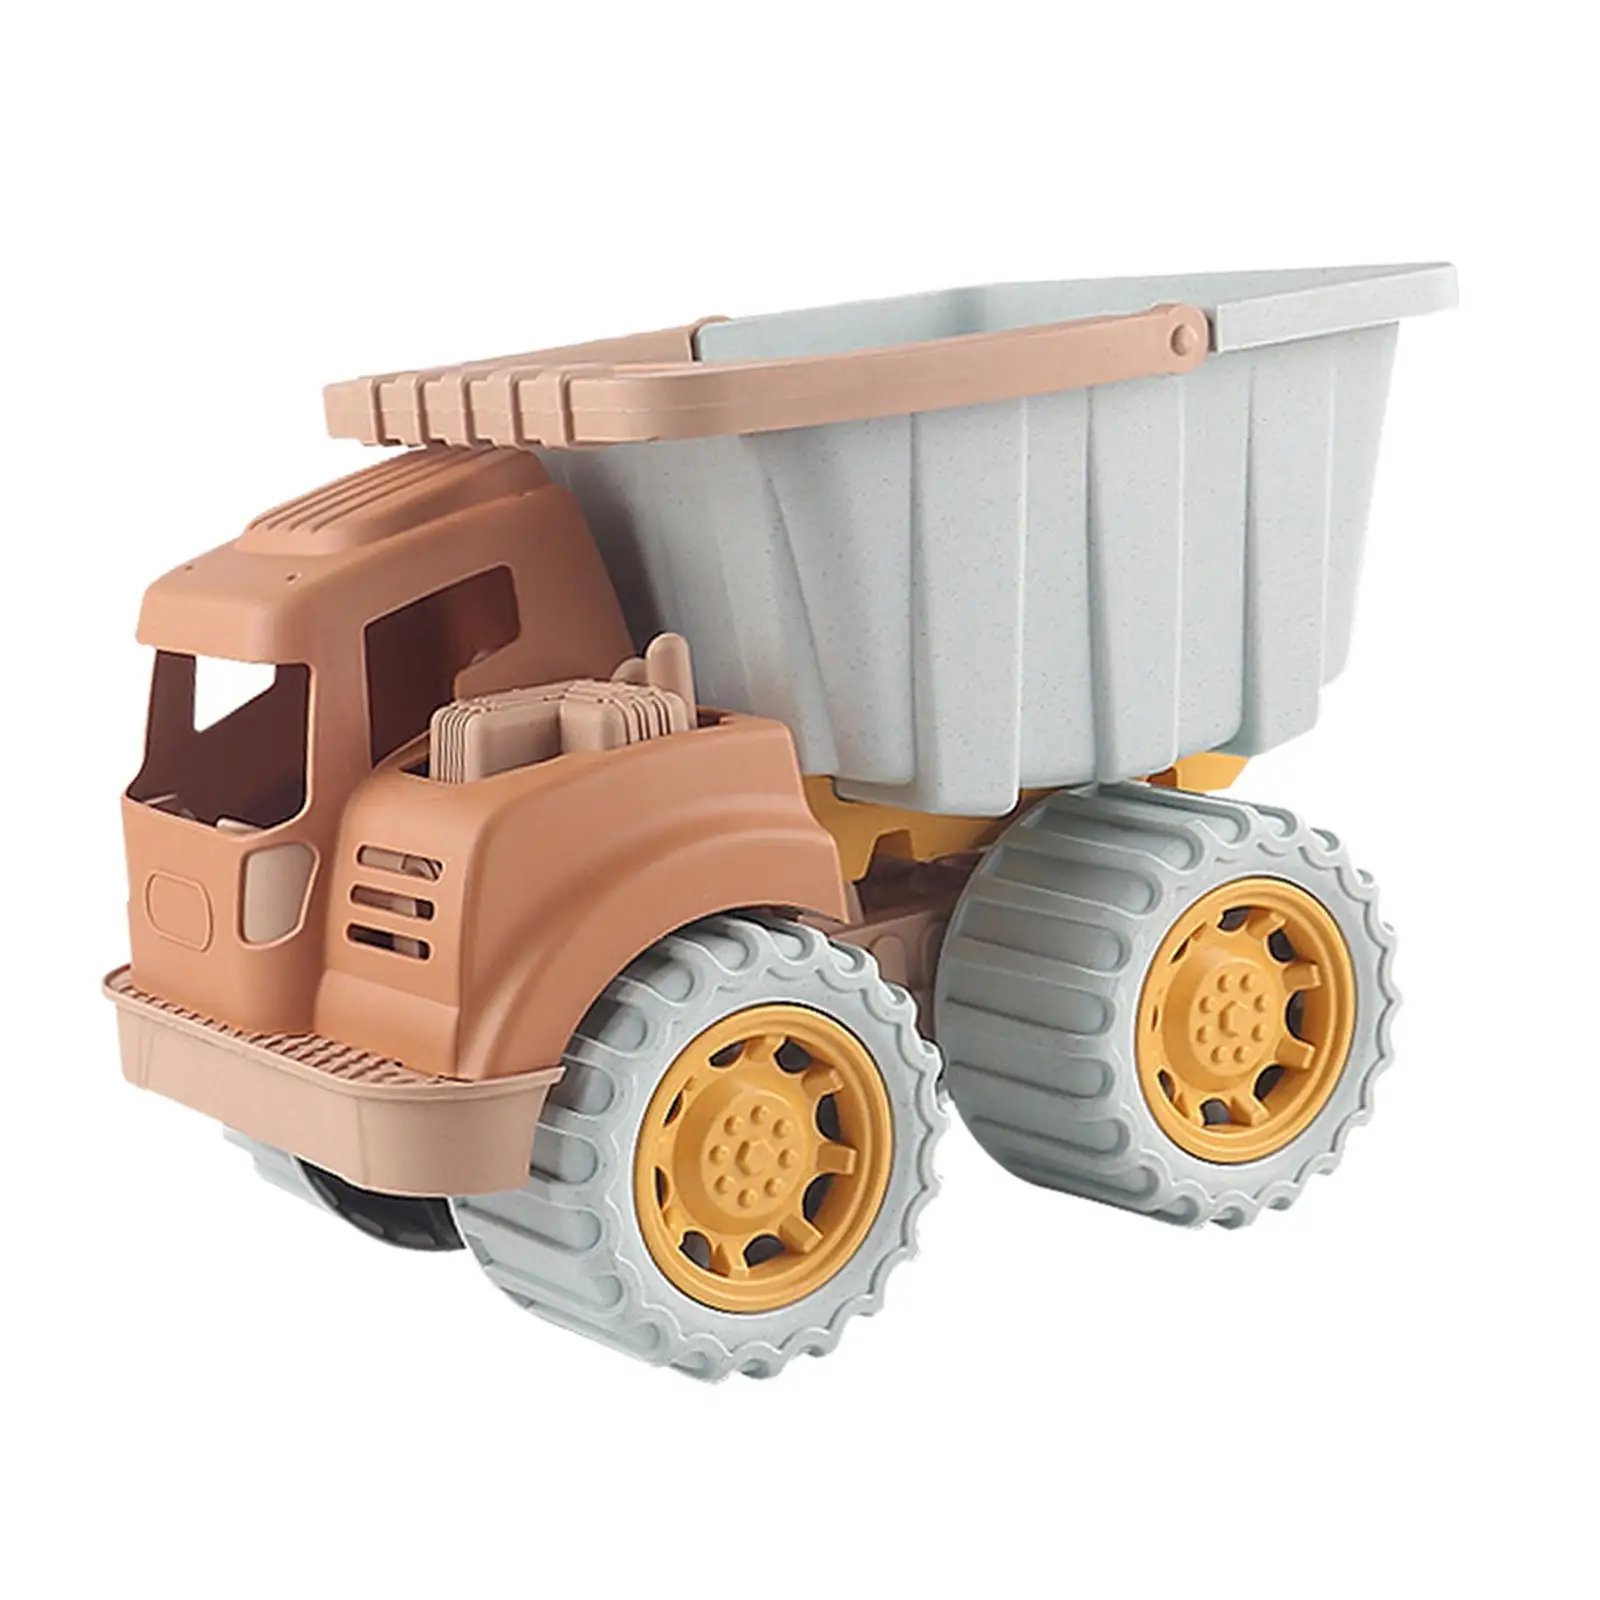 Dump Truck Toy Gross Motor Construction Toy Fine Motor Skills Sand Truck for Birthday Gift Party Favors Sand Beach Toy Children